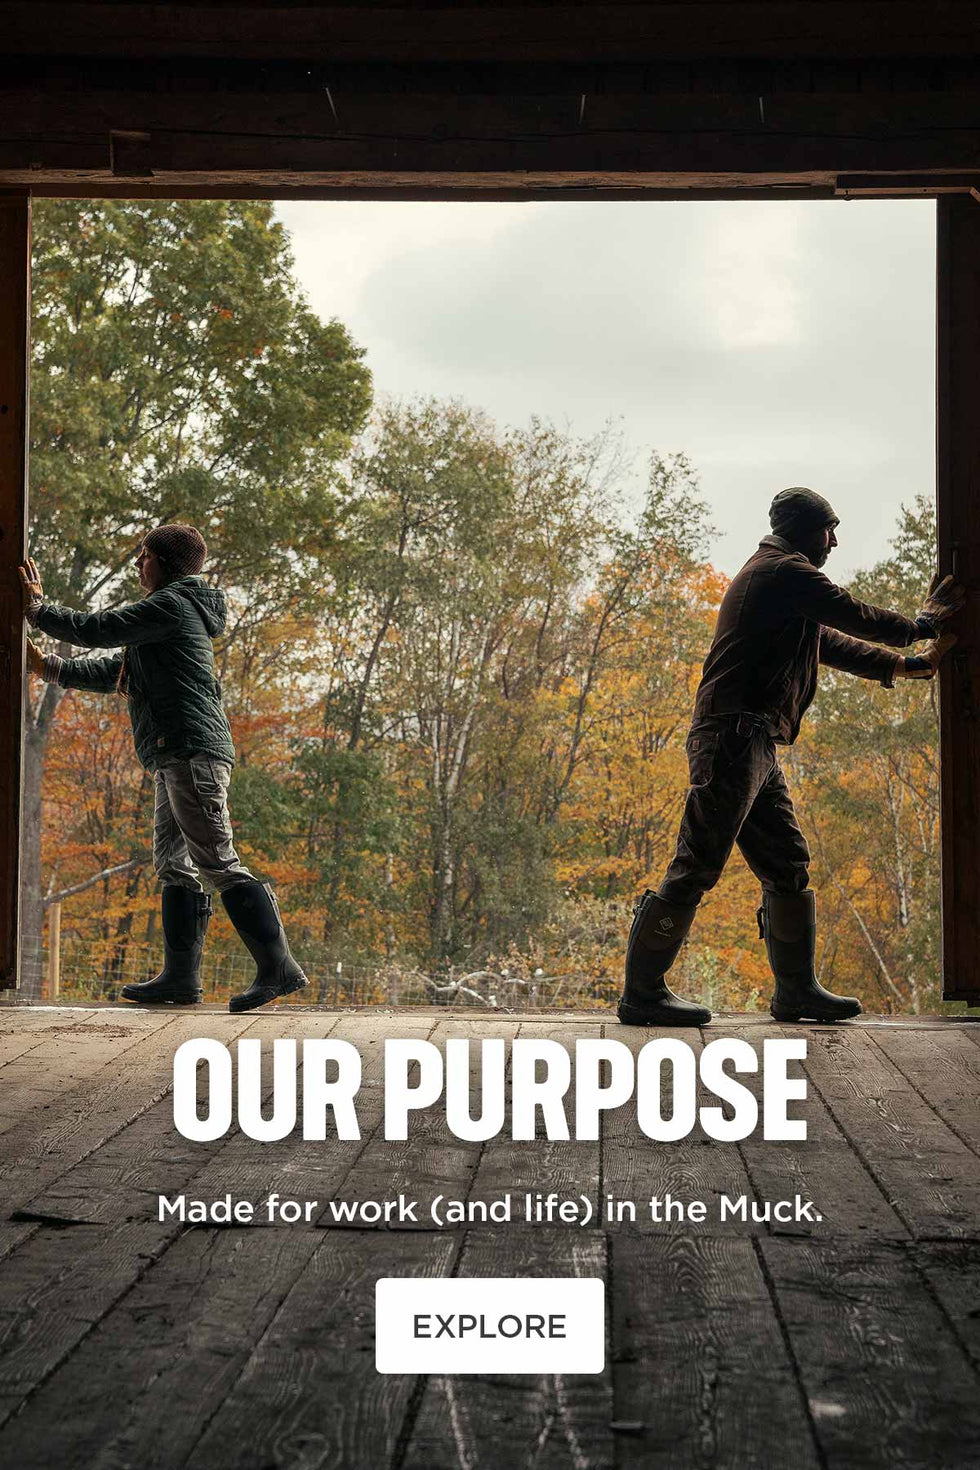 OUR PURPOSE. Made for work (and life) in the muck. EXPLORE